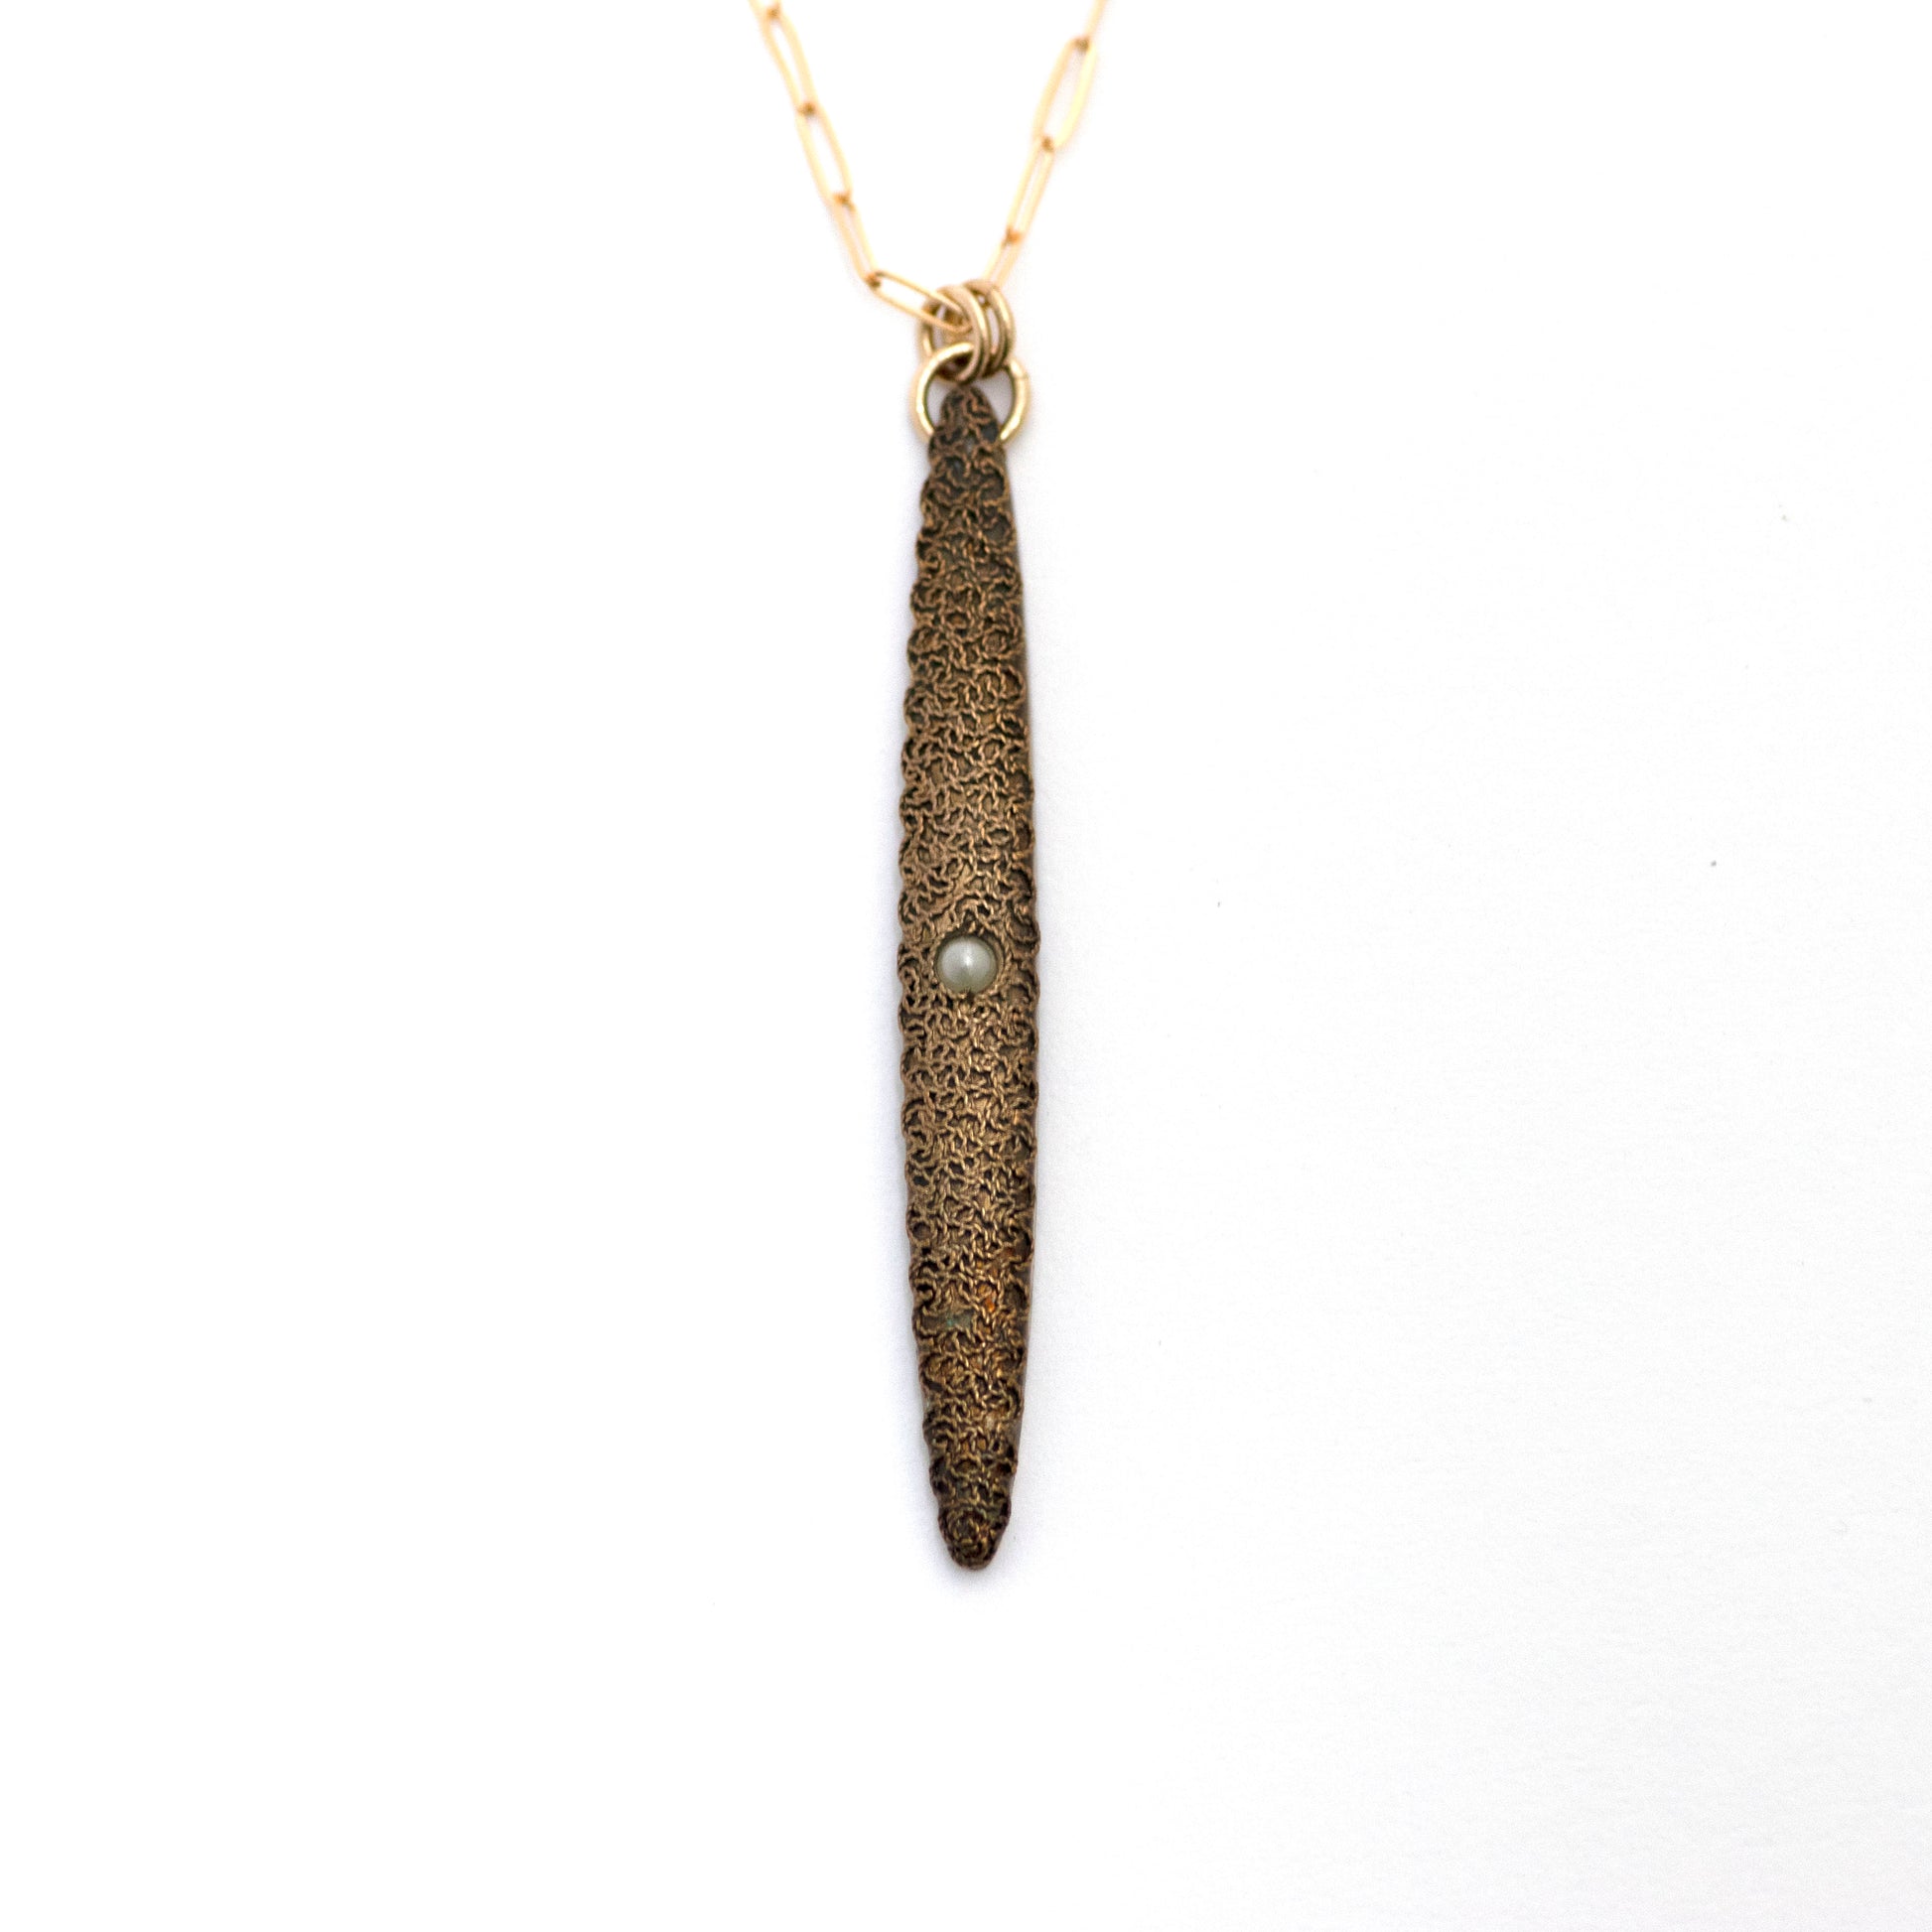 Seed Pearl Filigree Etruscan Revival Vertical Bar Necklace on a 14k yellow gold filled paperclip style chain